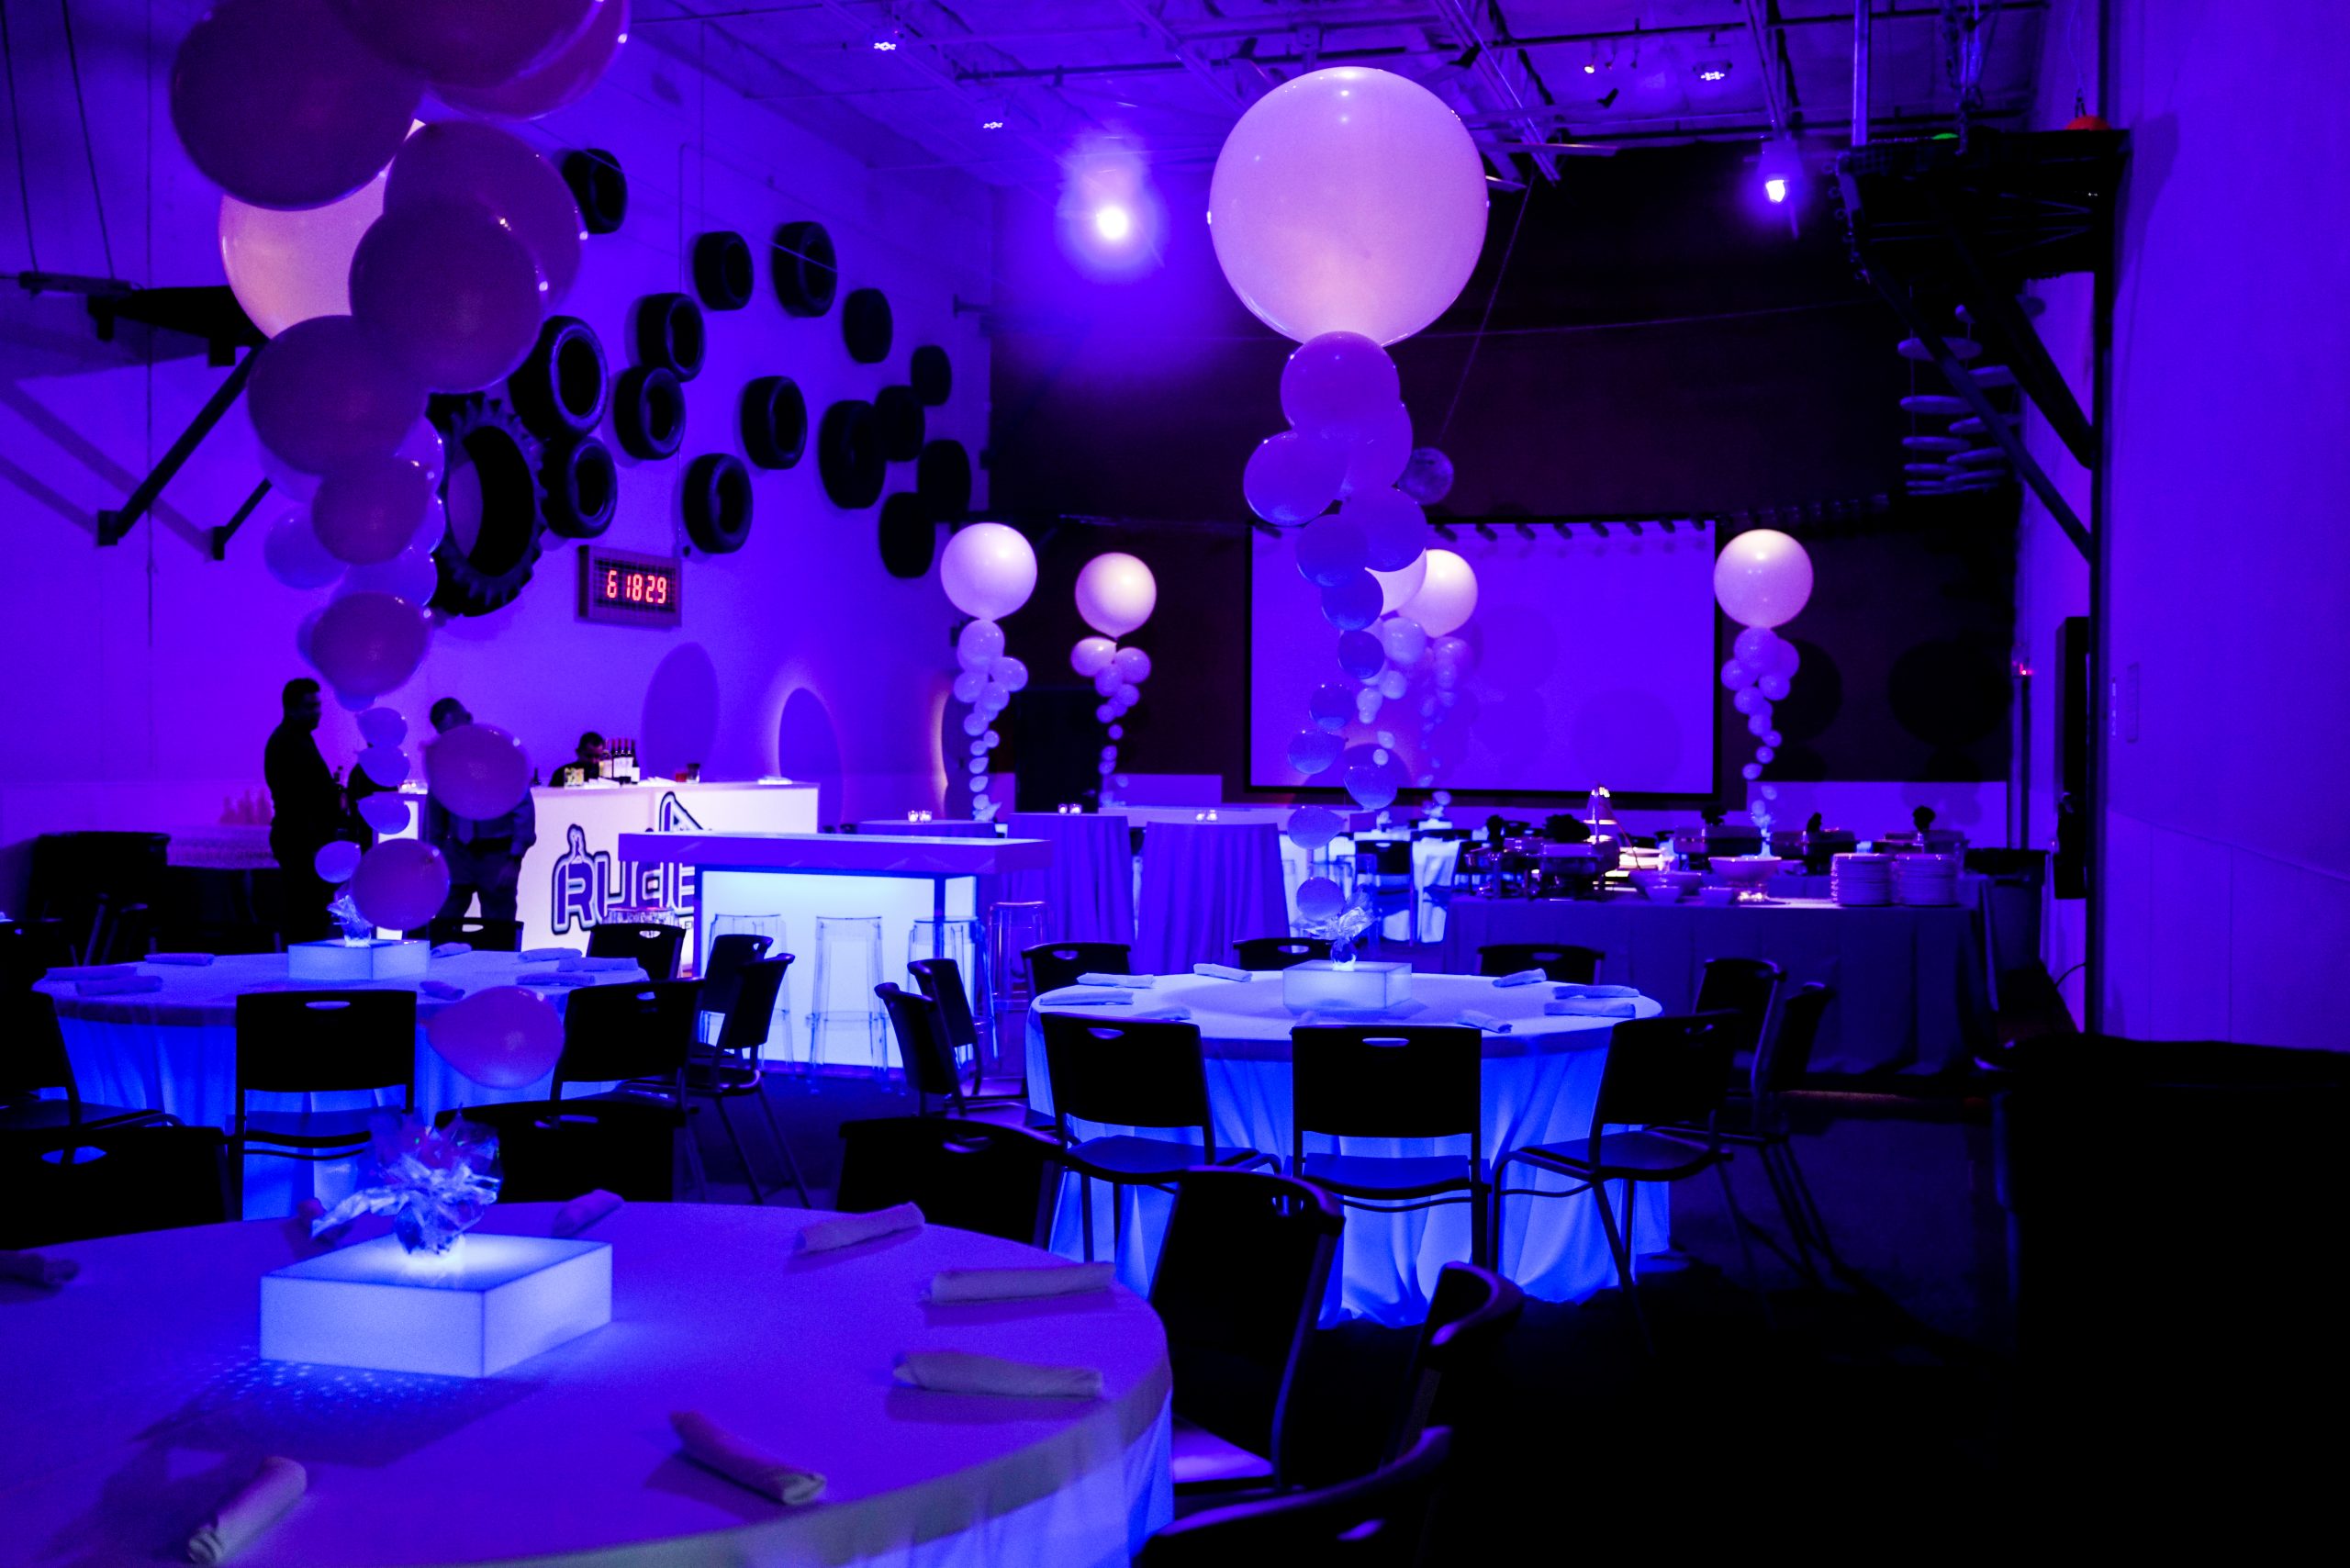 Event room set up with black lights, balloons, tables and chairs, during a private event at Group Dynamix